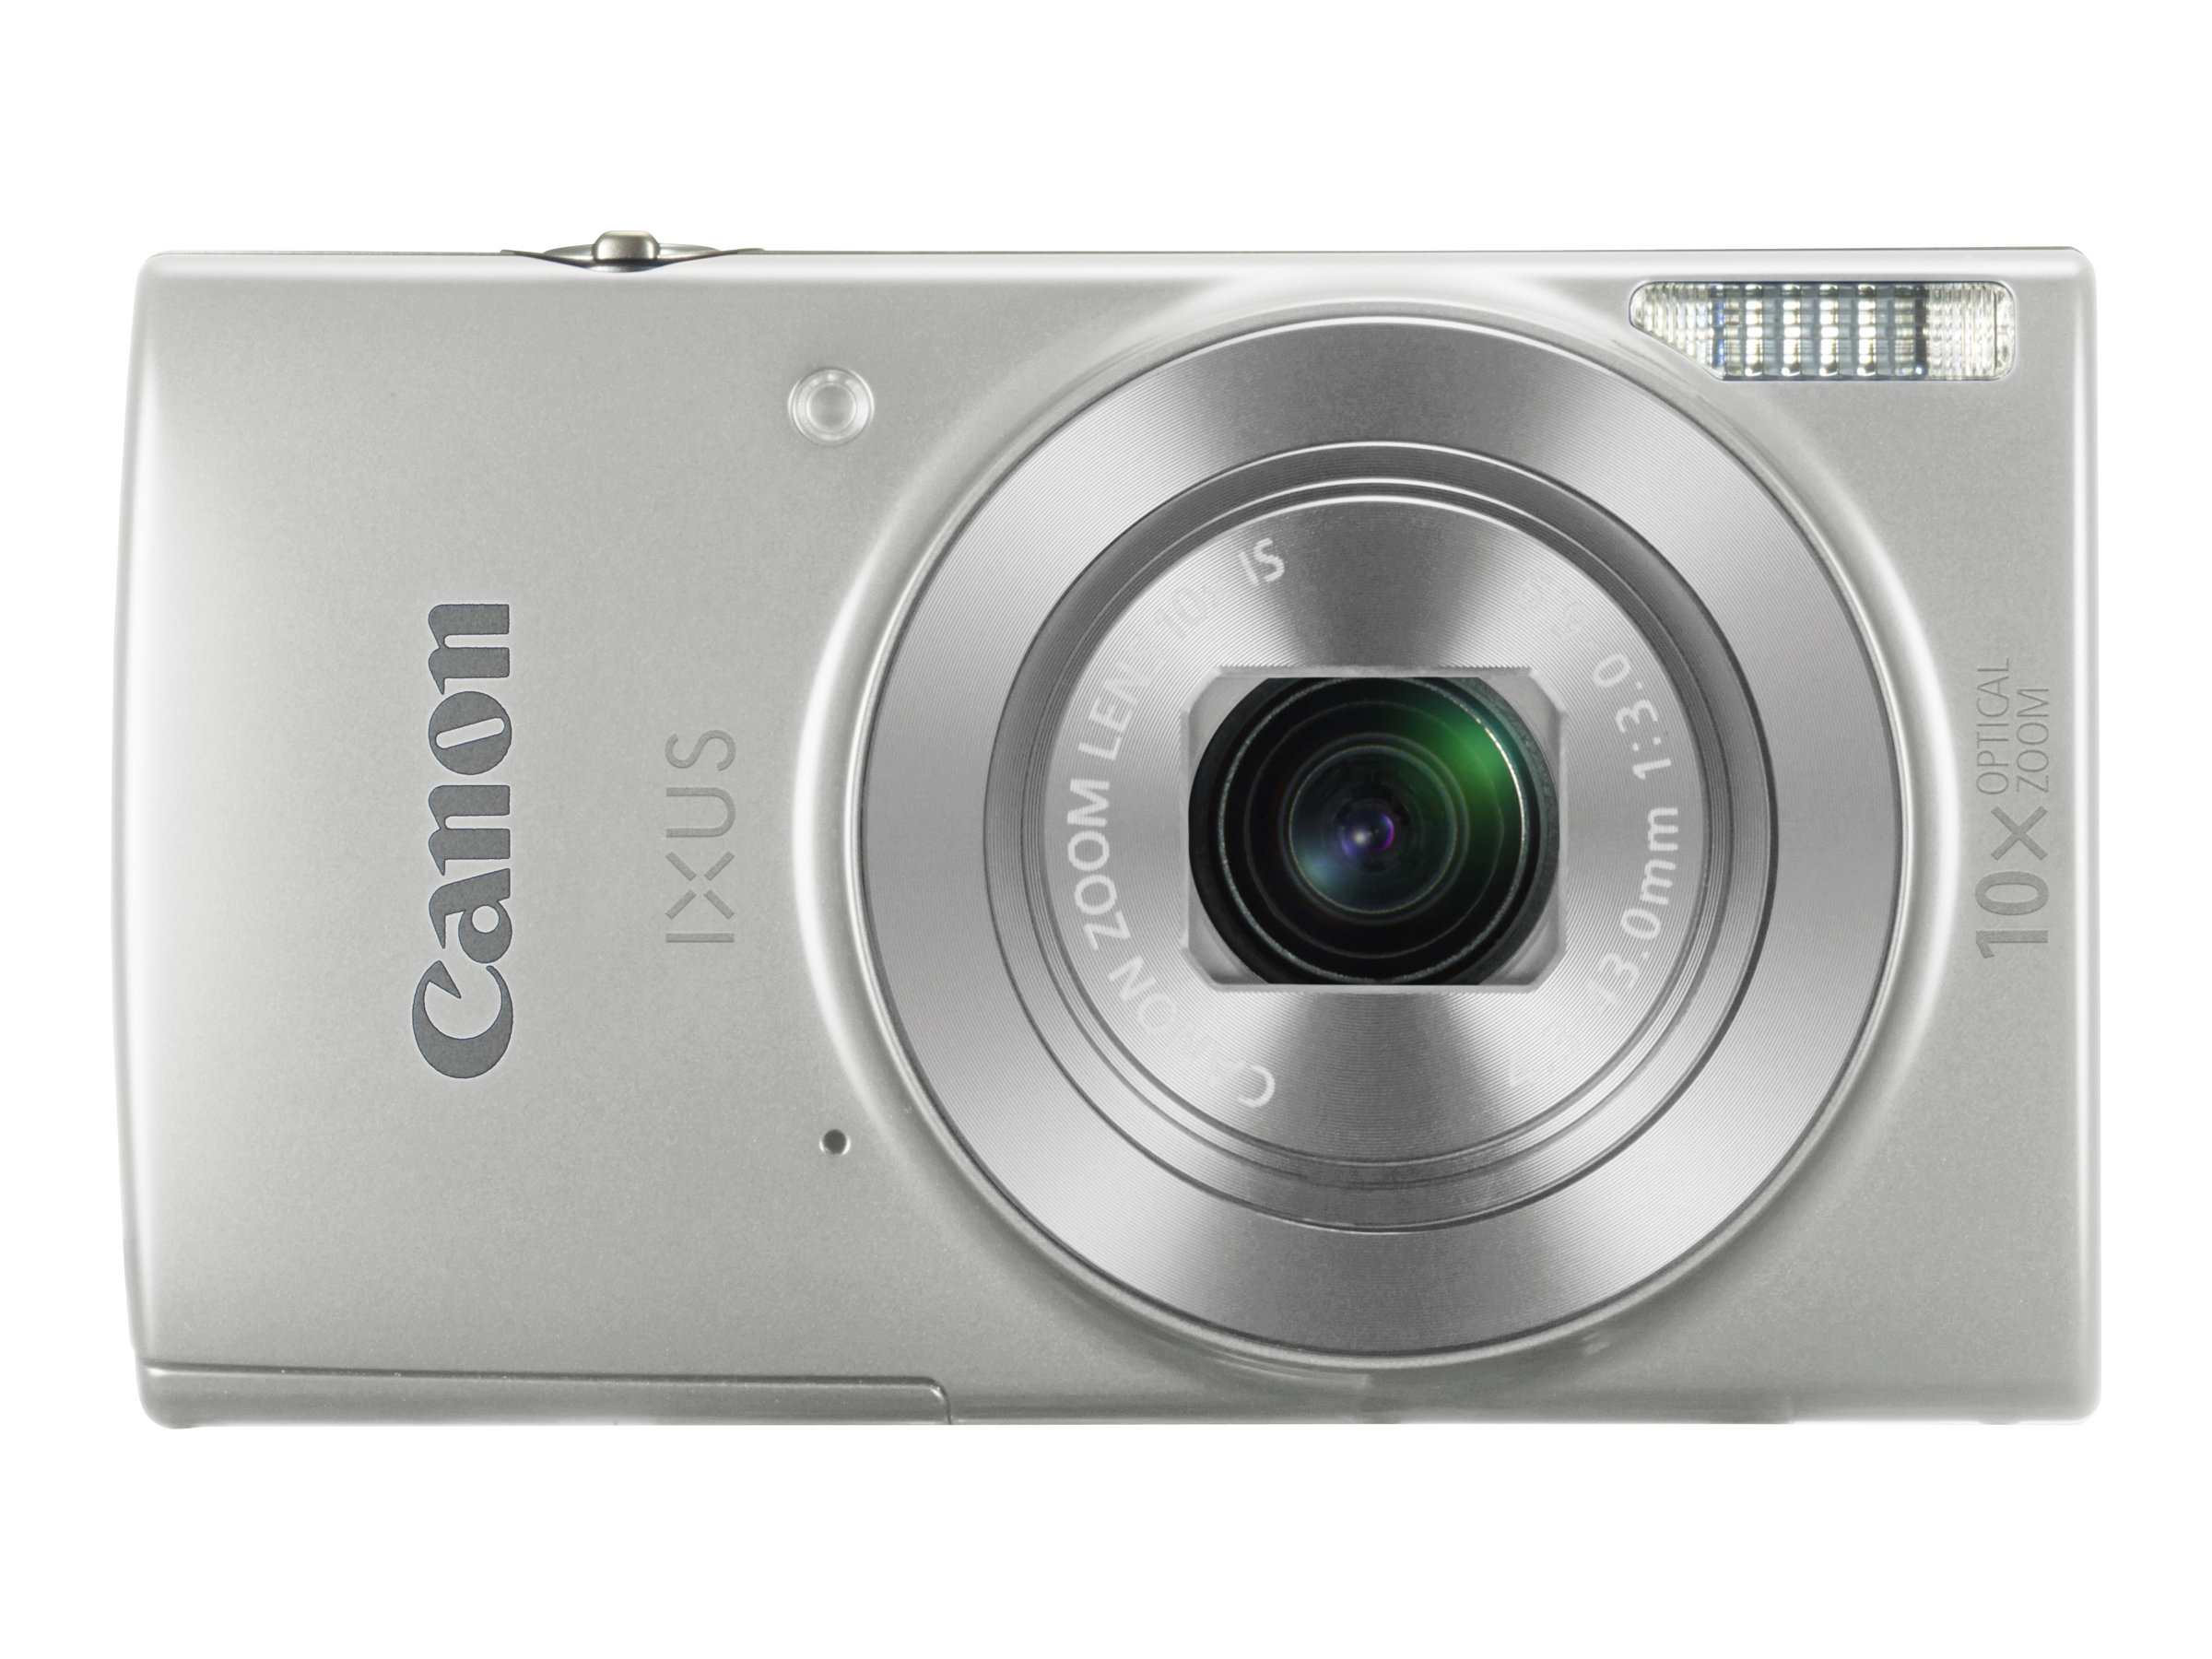 Canon IXUS 190 - pictures, photos and images